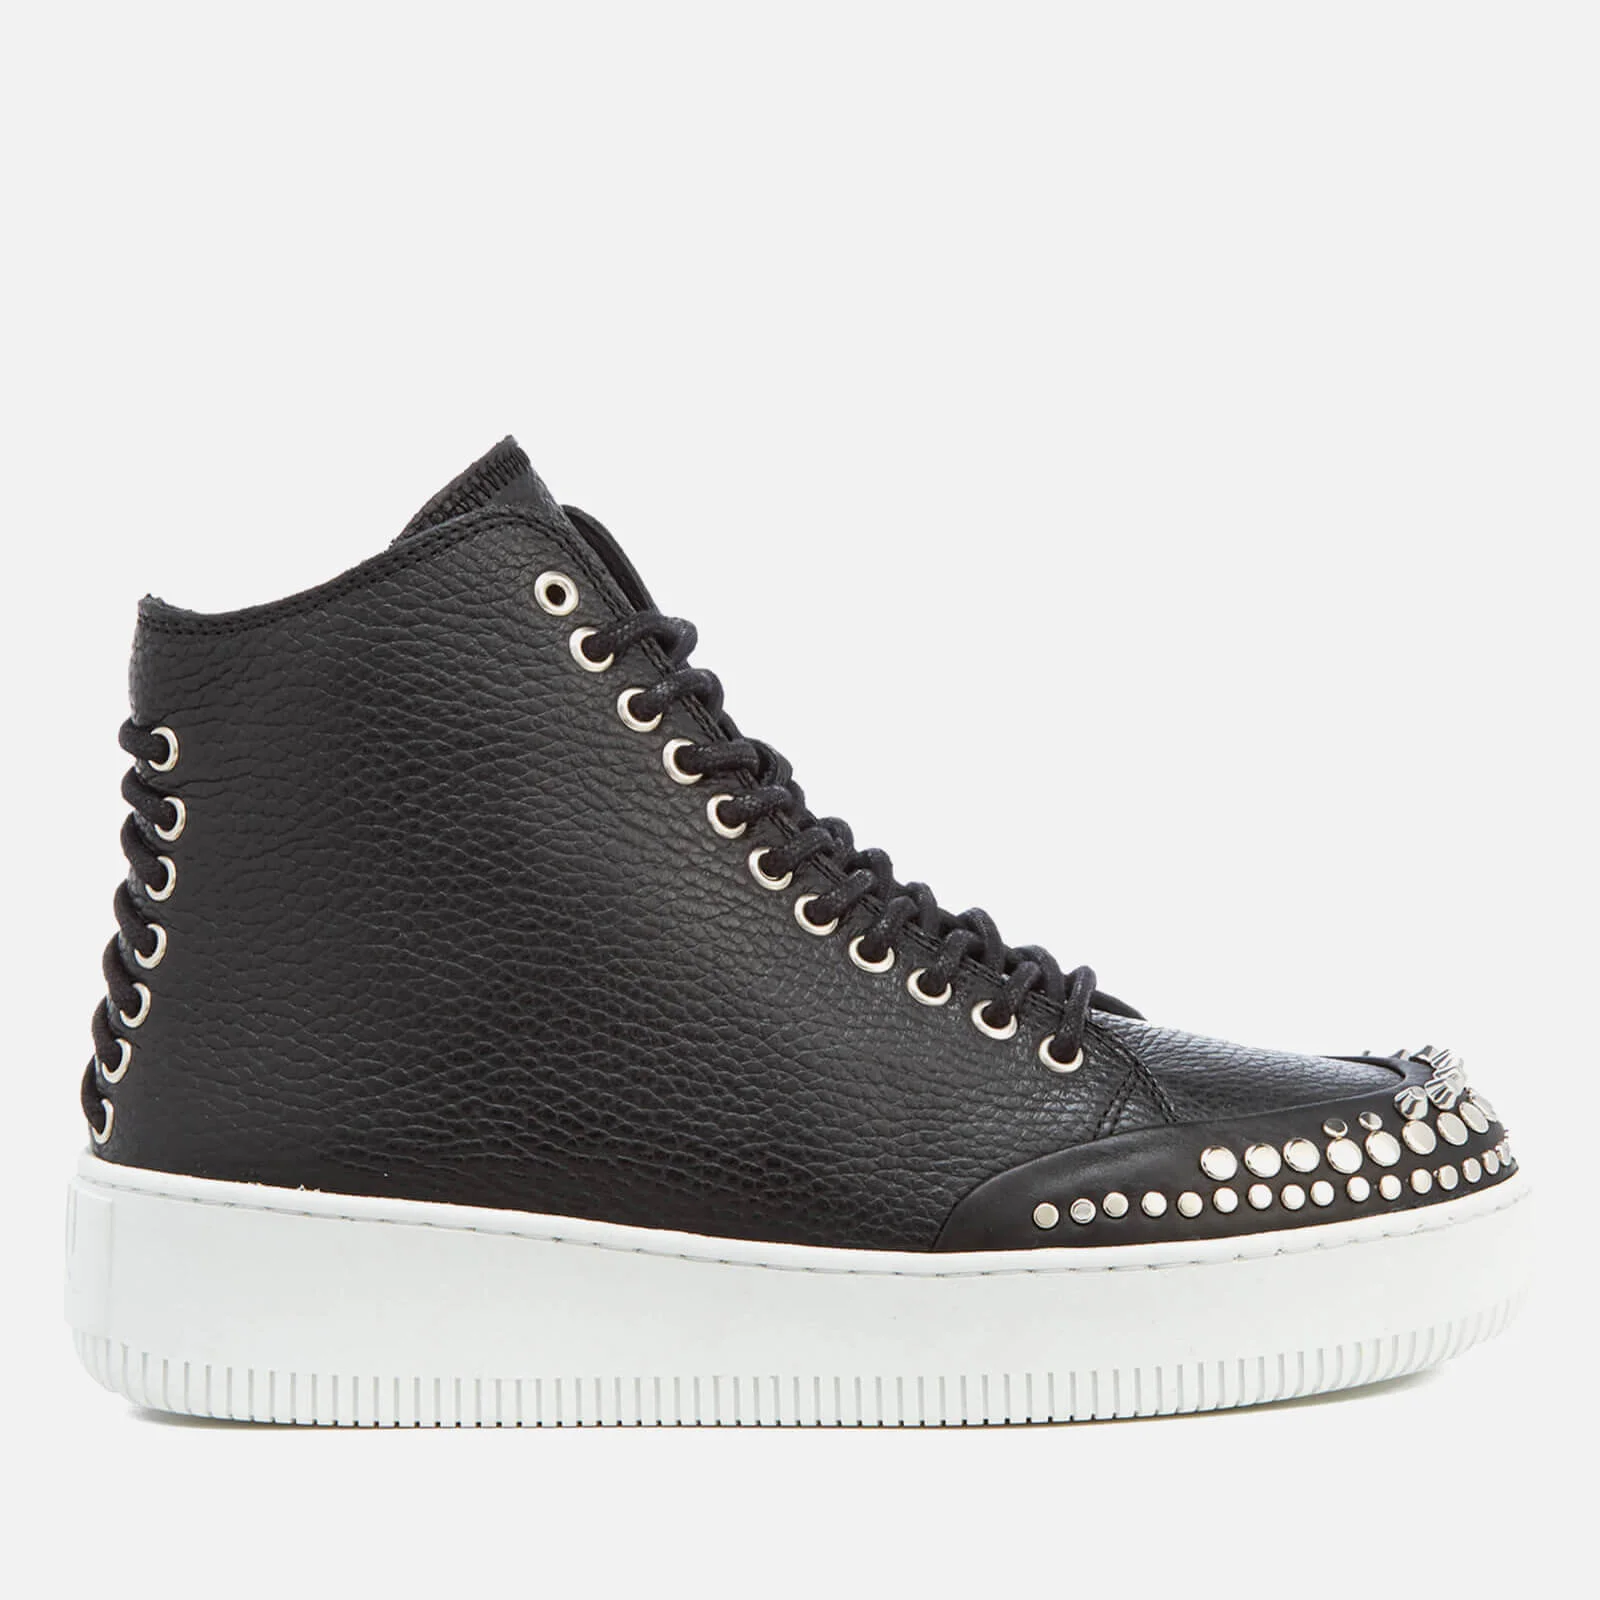 McQ Alexander McQueen Women's Netil Laced Eyelets Leather Hi-Top Trainers - Black Image 1